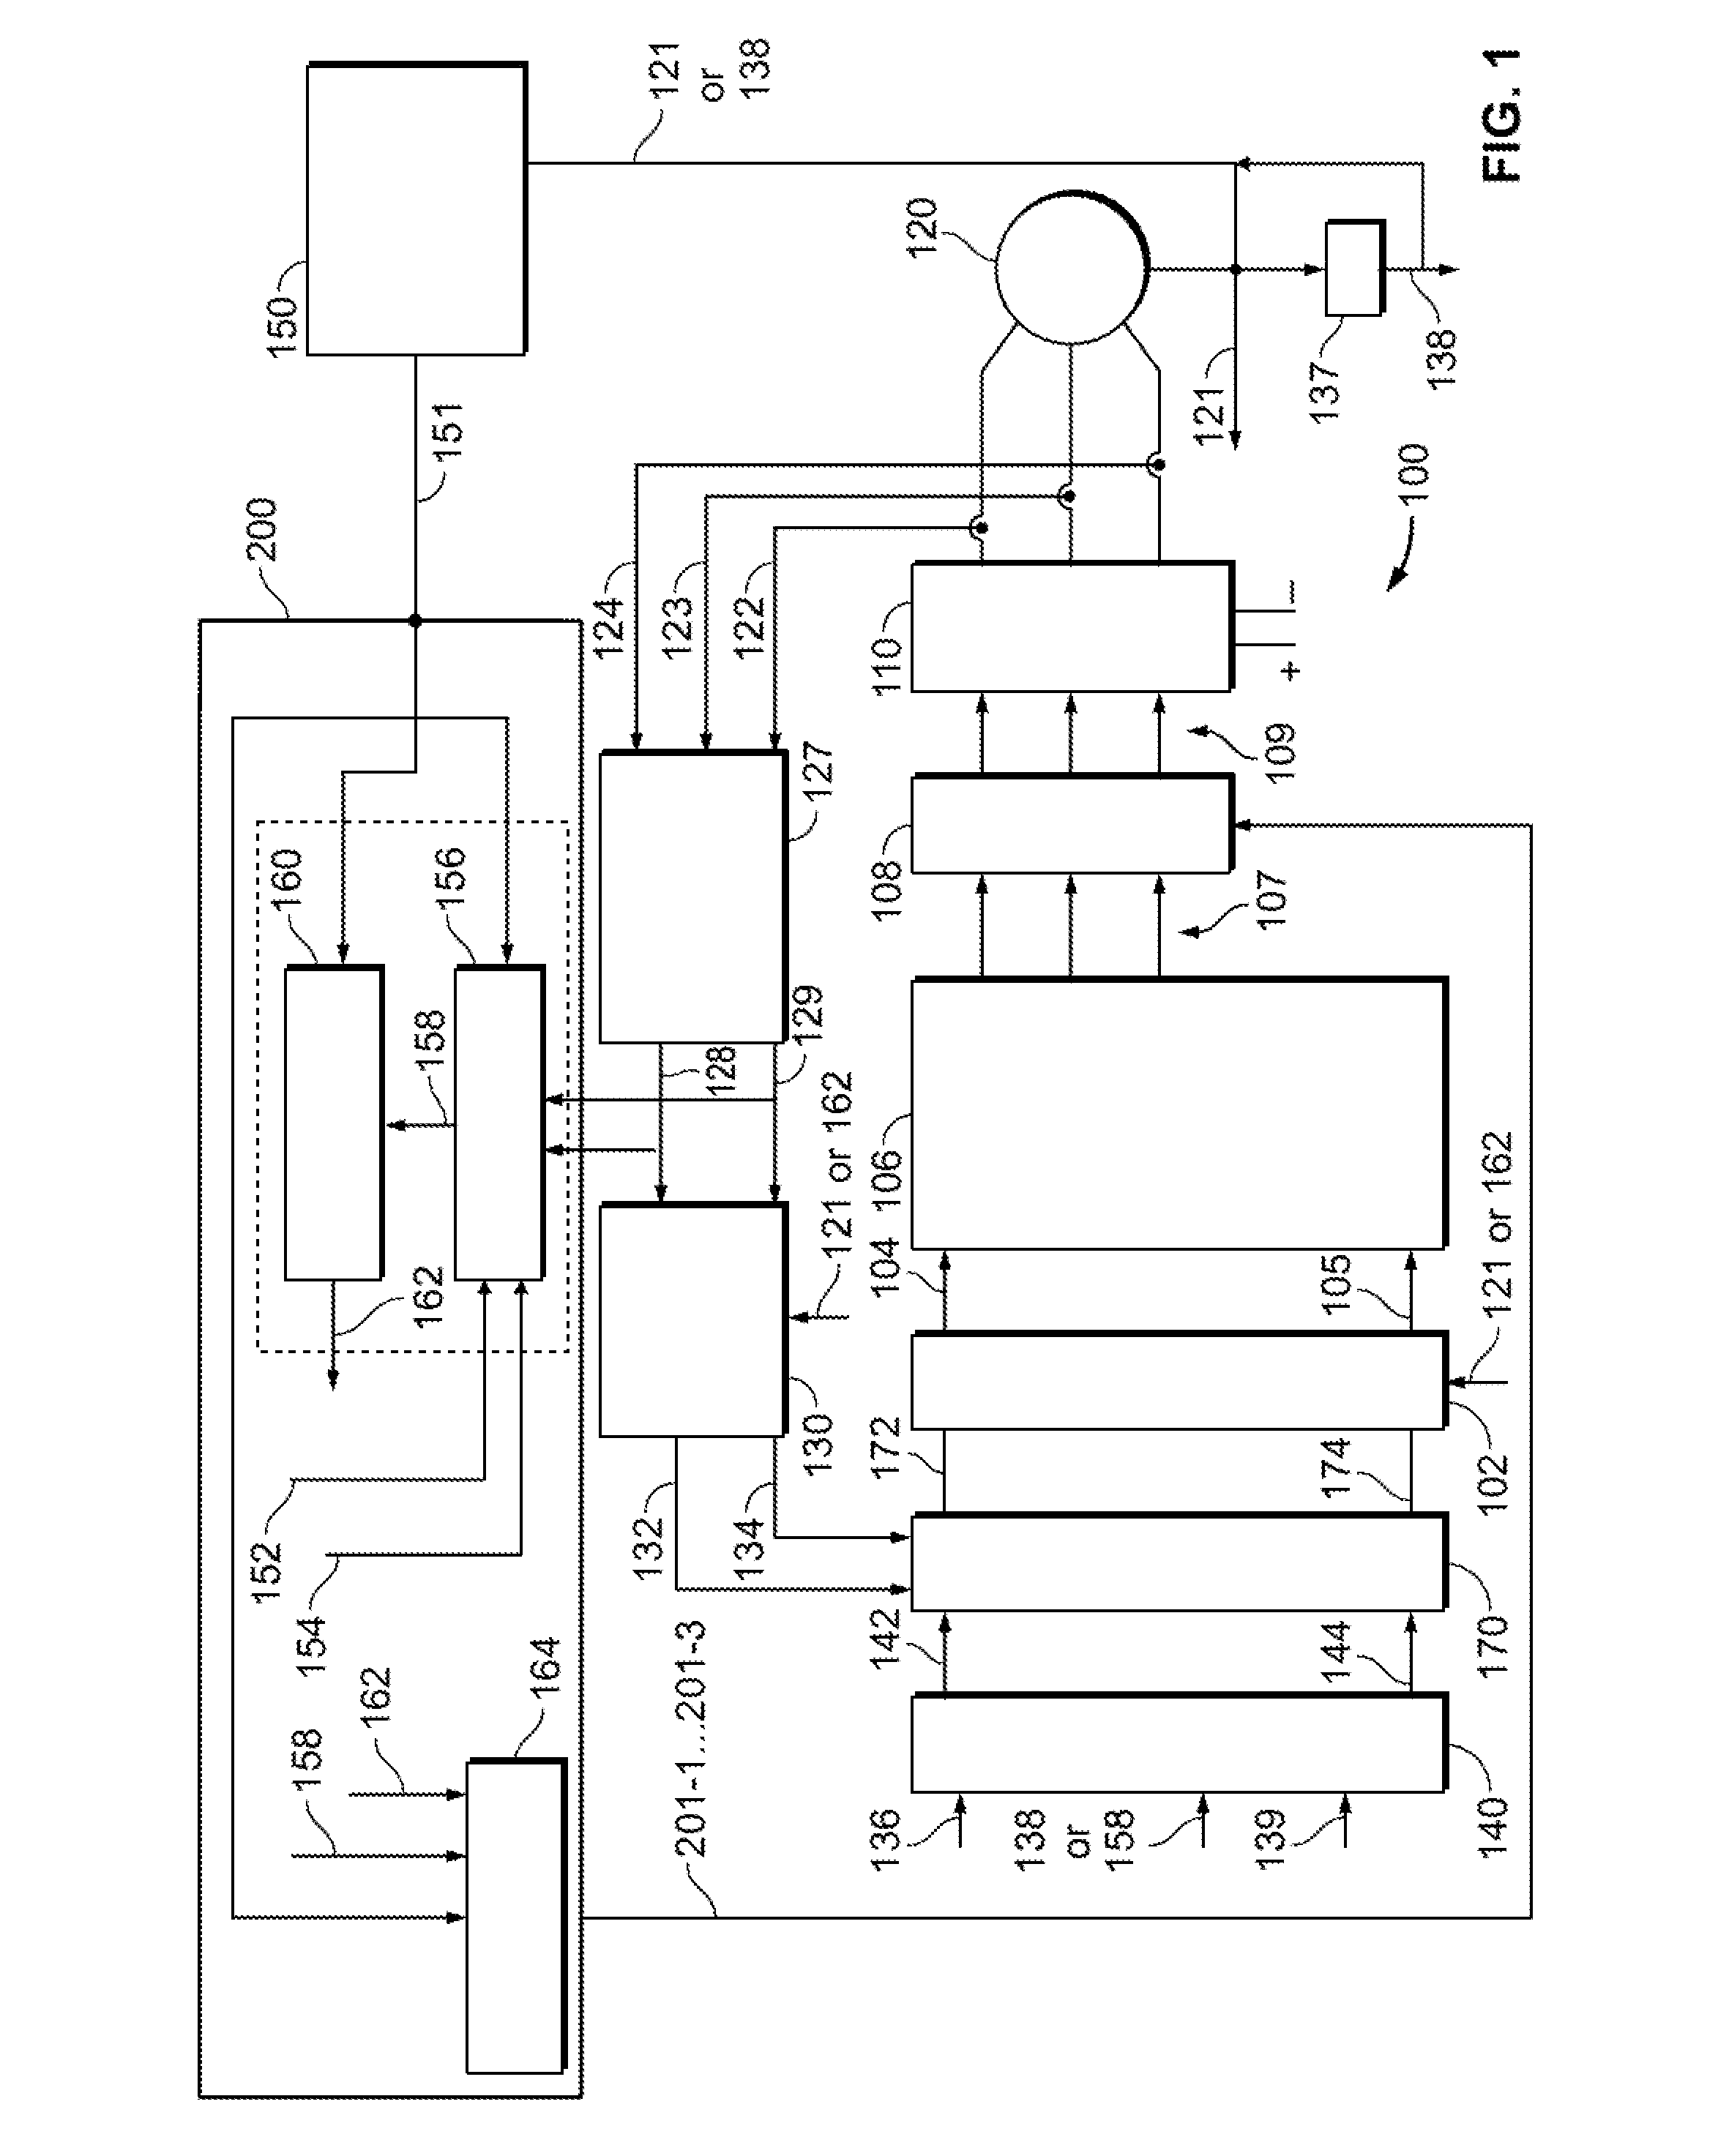 Method and system for estimating electrical angular speed of a permanent magnet machine